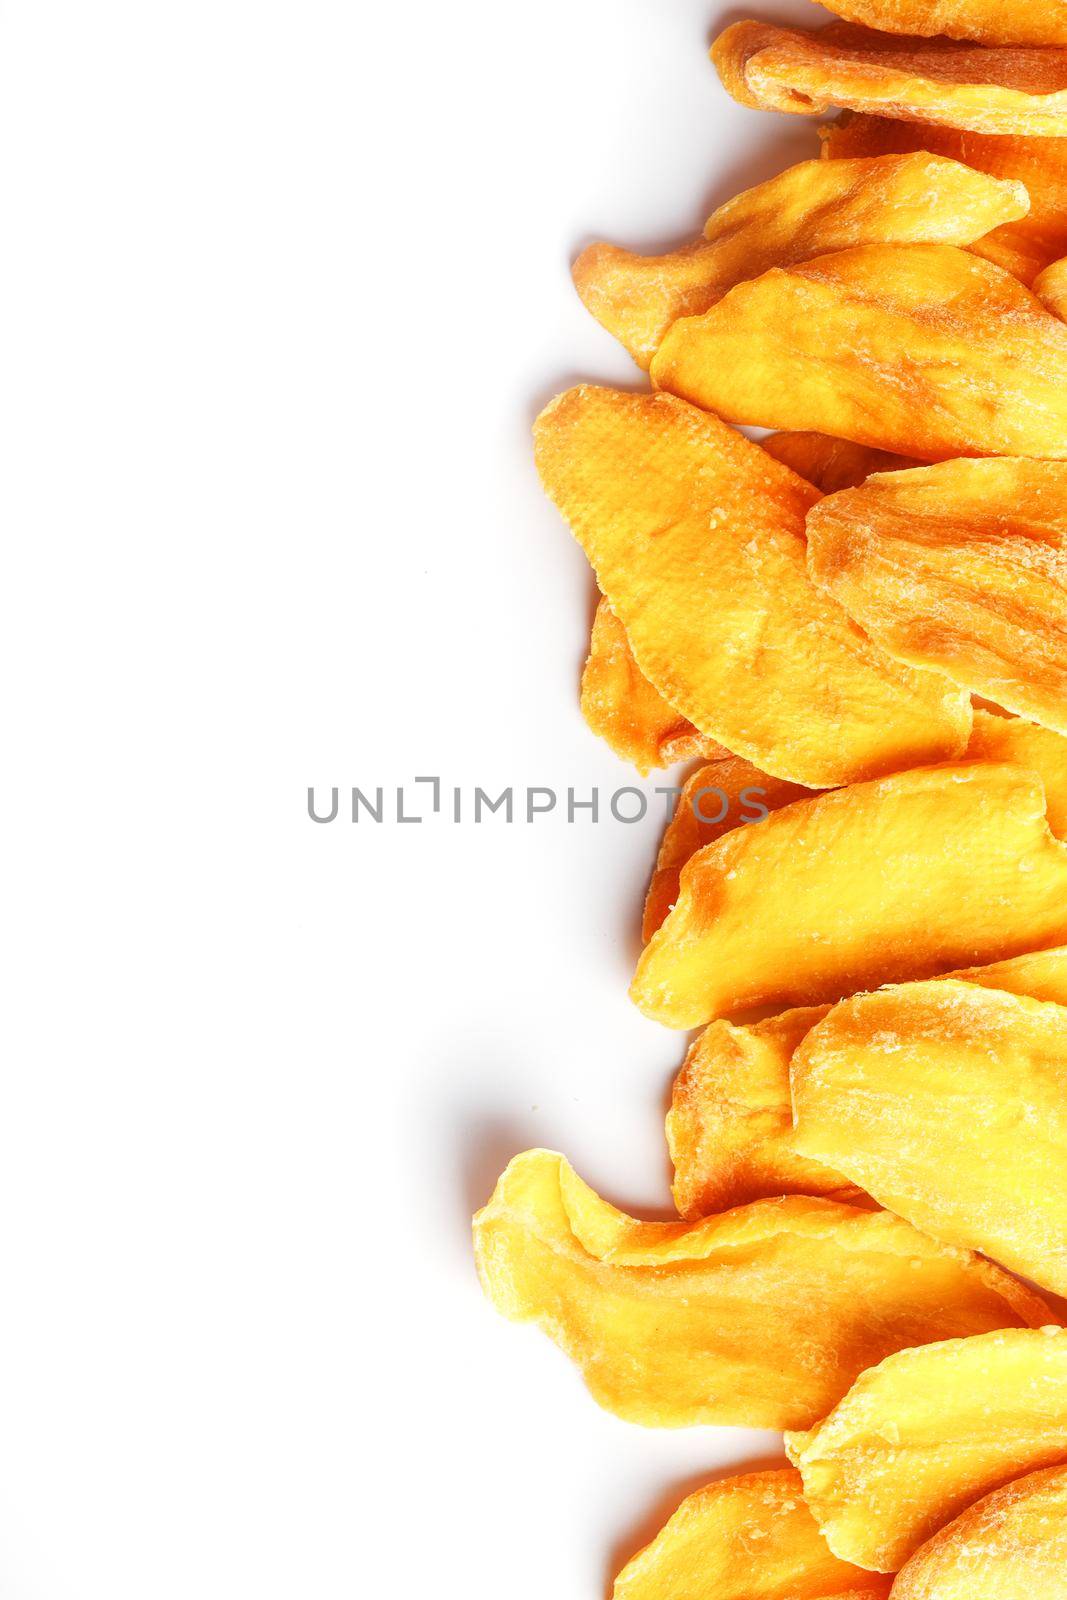 Dried mango sliced on a white background with free space by AlexGrec